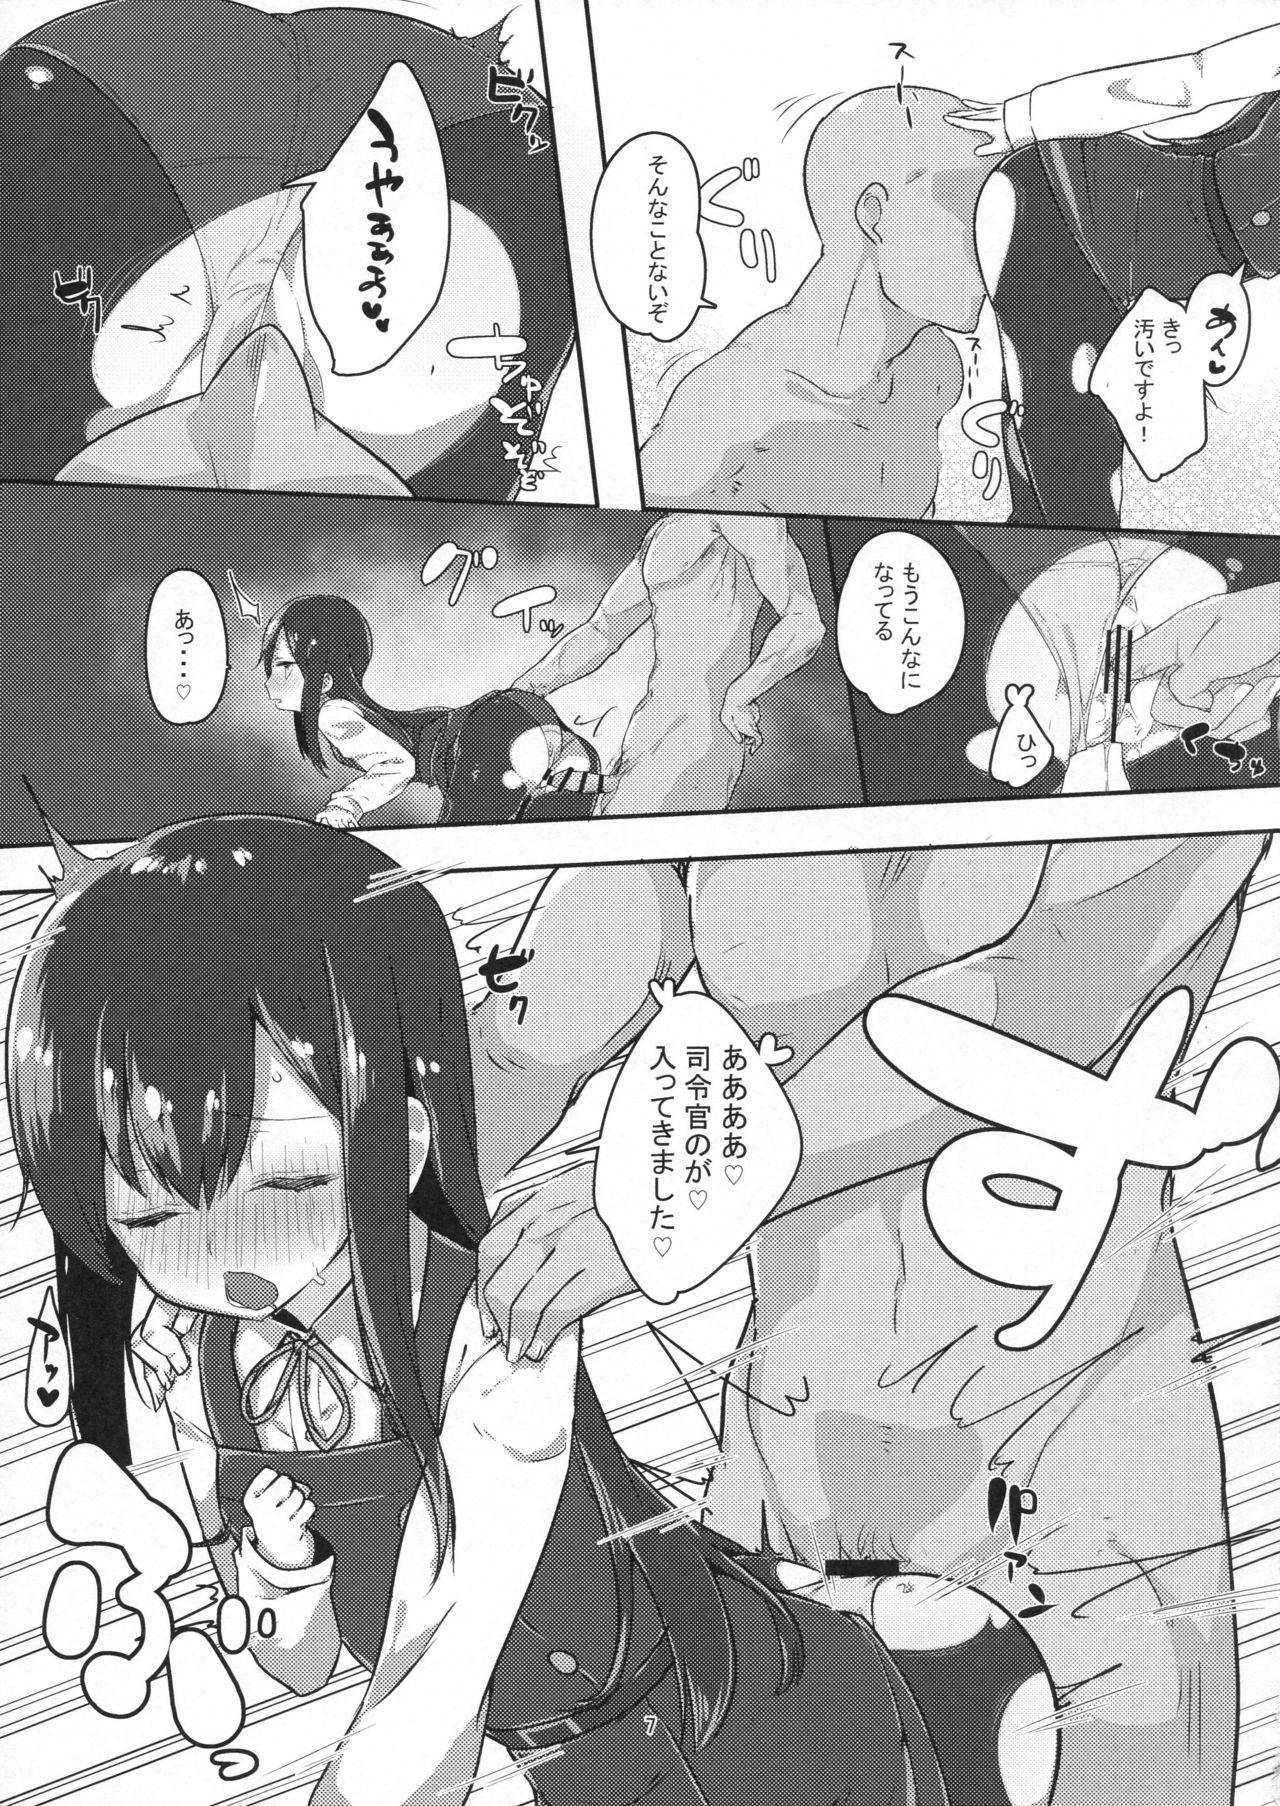 Spooning Sweet Memory - Kantai collection Price - Page 6